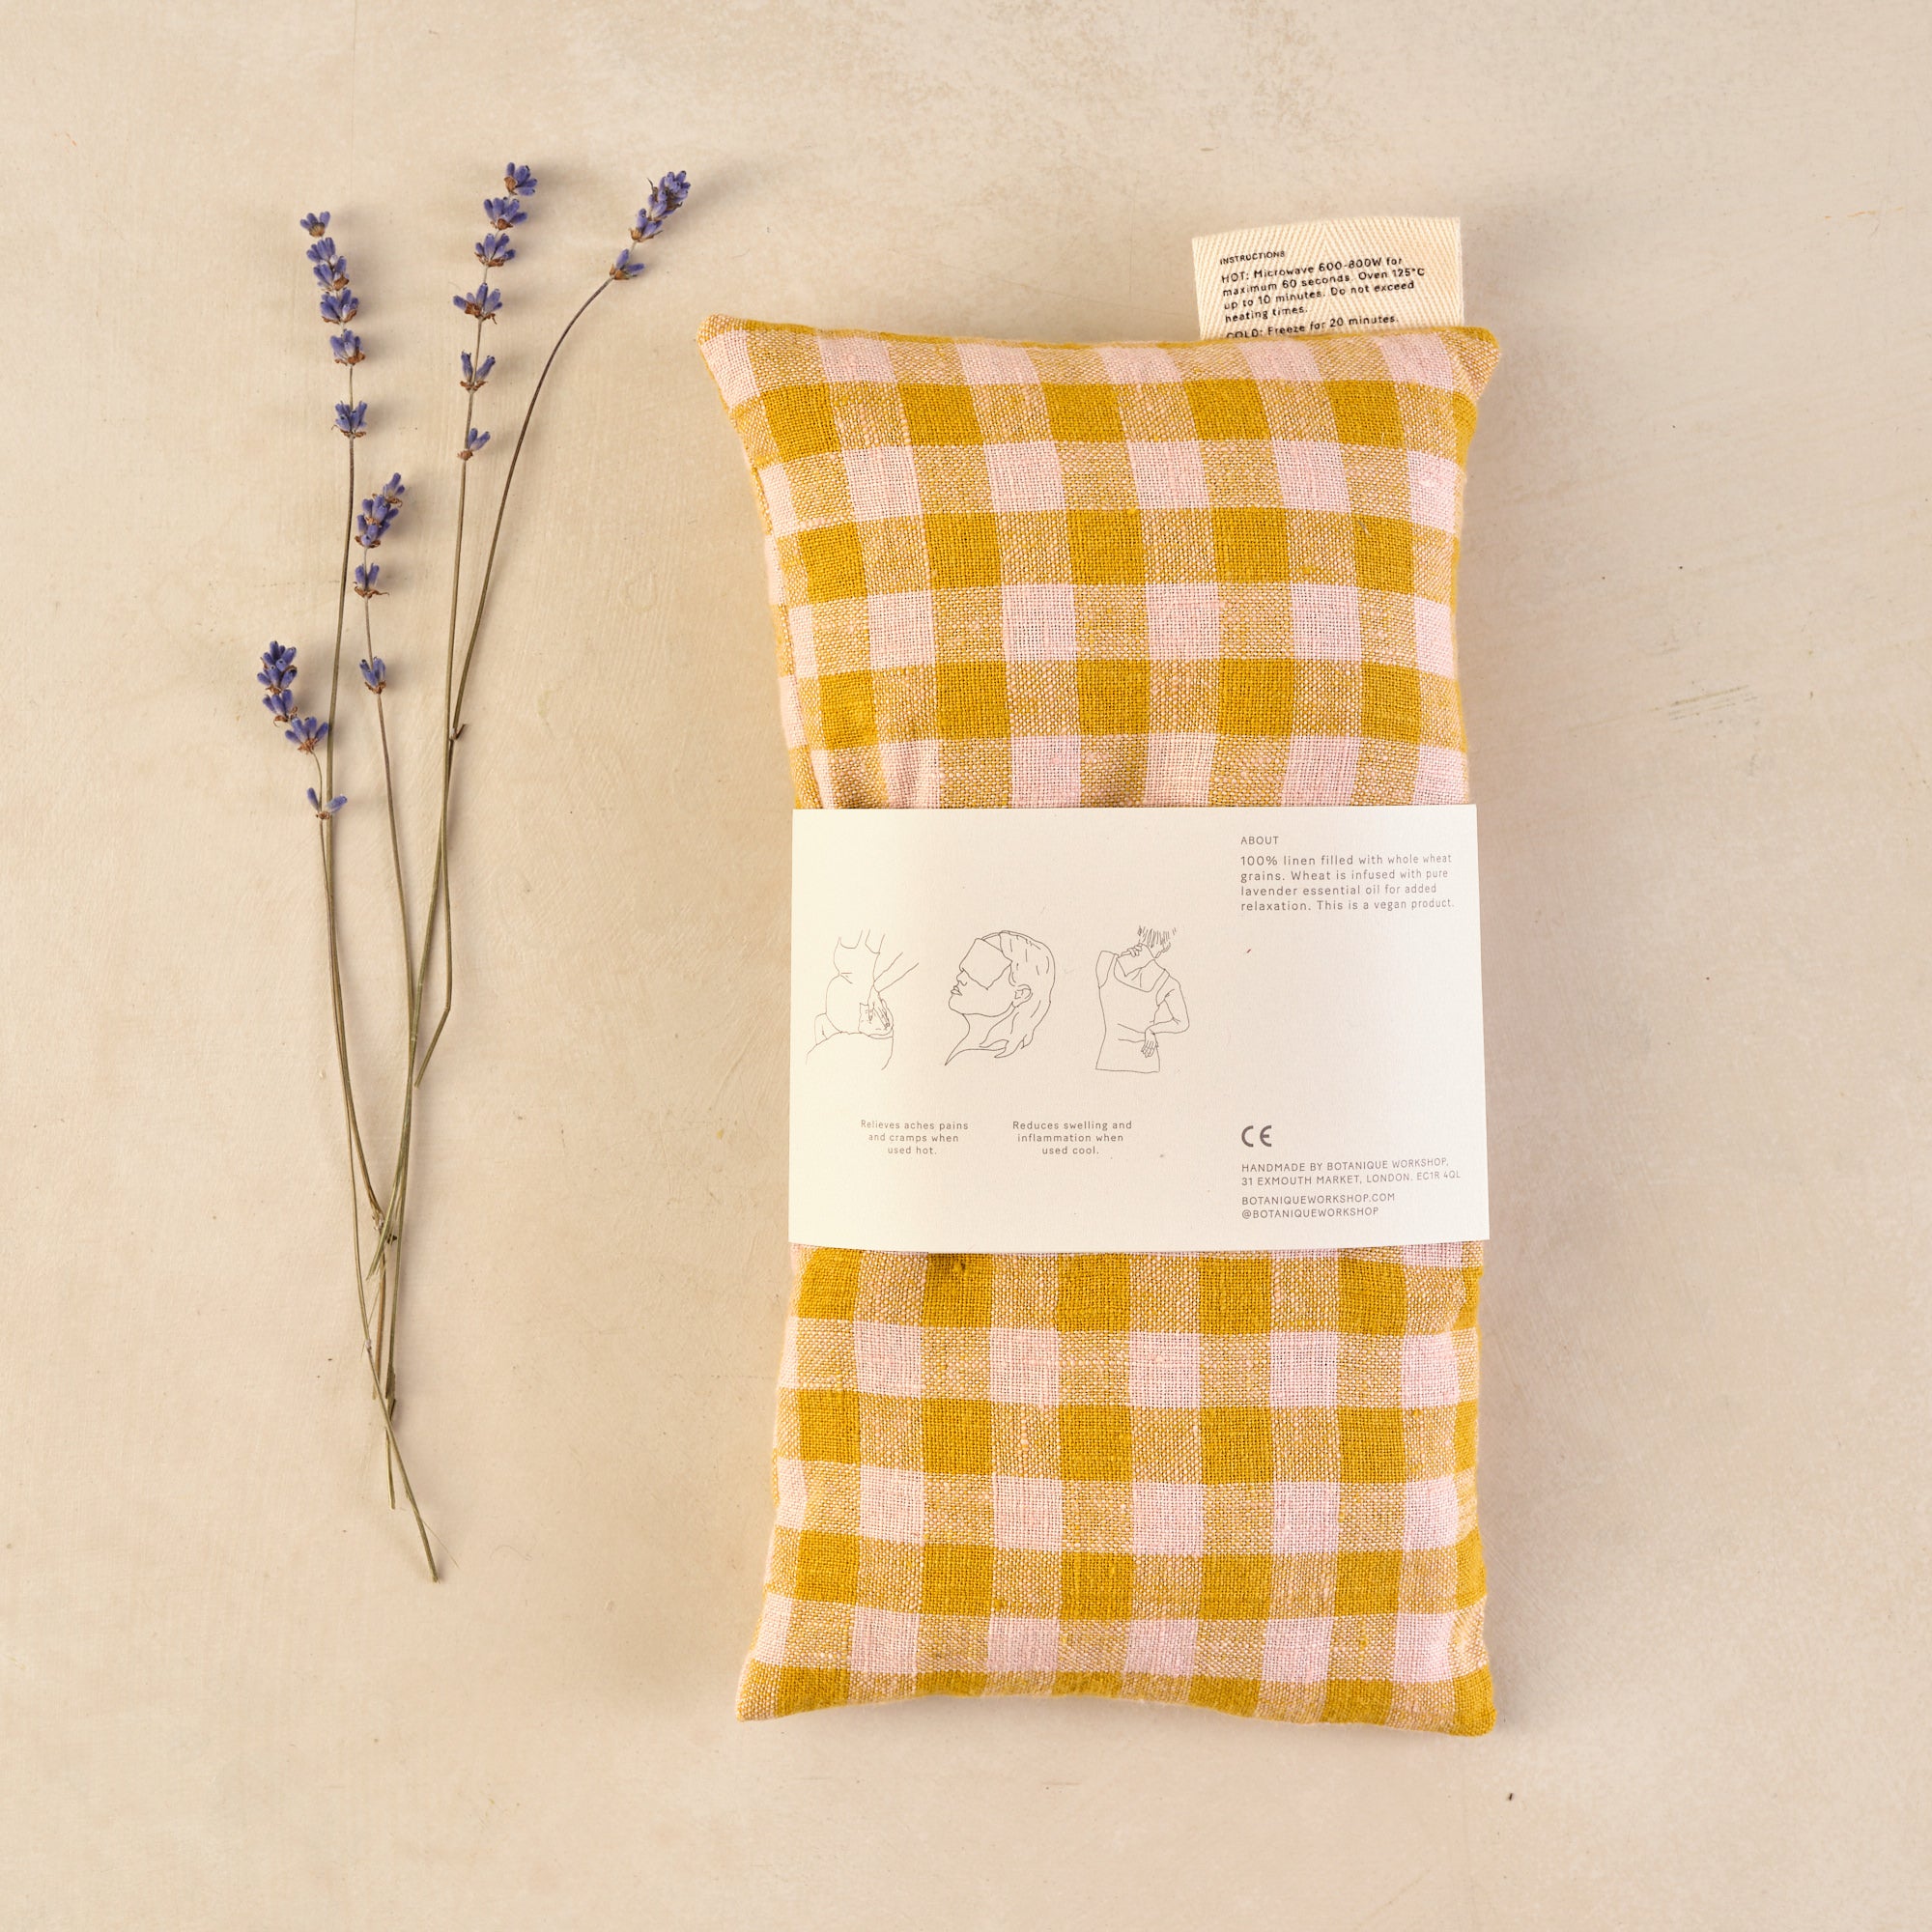 Multi-Use Lavender Therapy Pillow: Large Linen